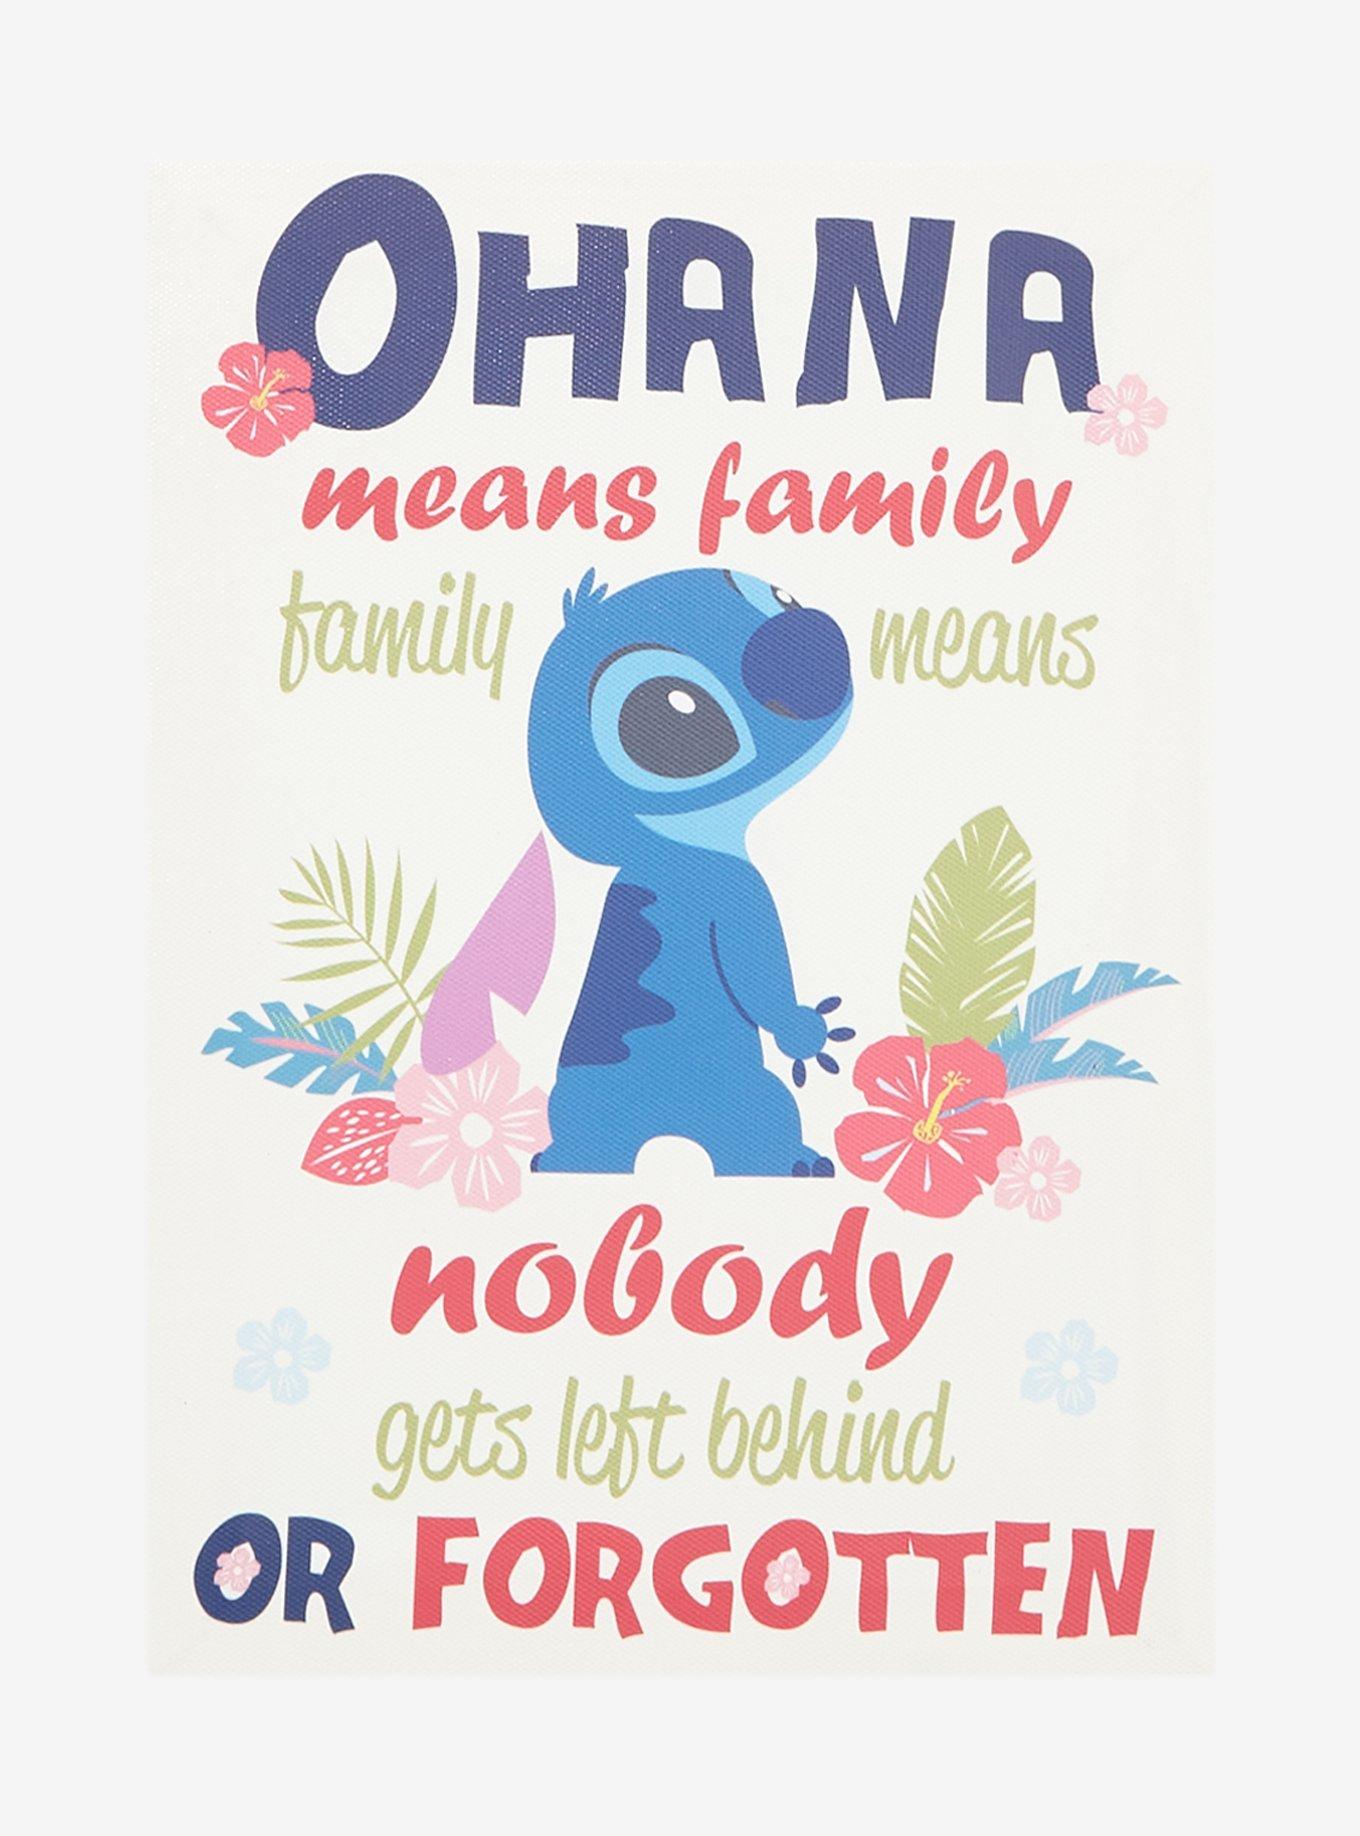 stitch ohana means family quote